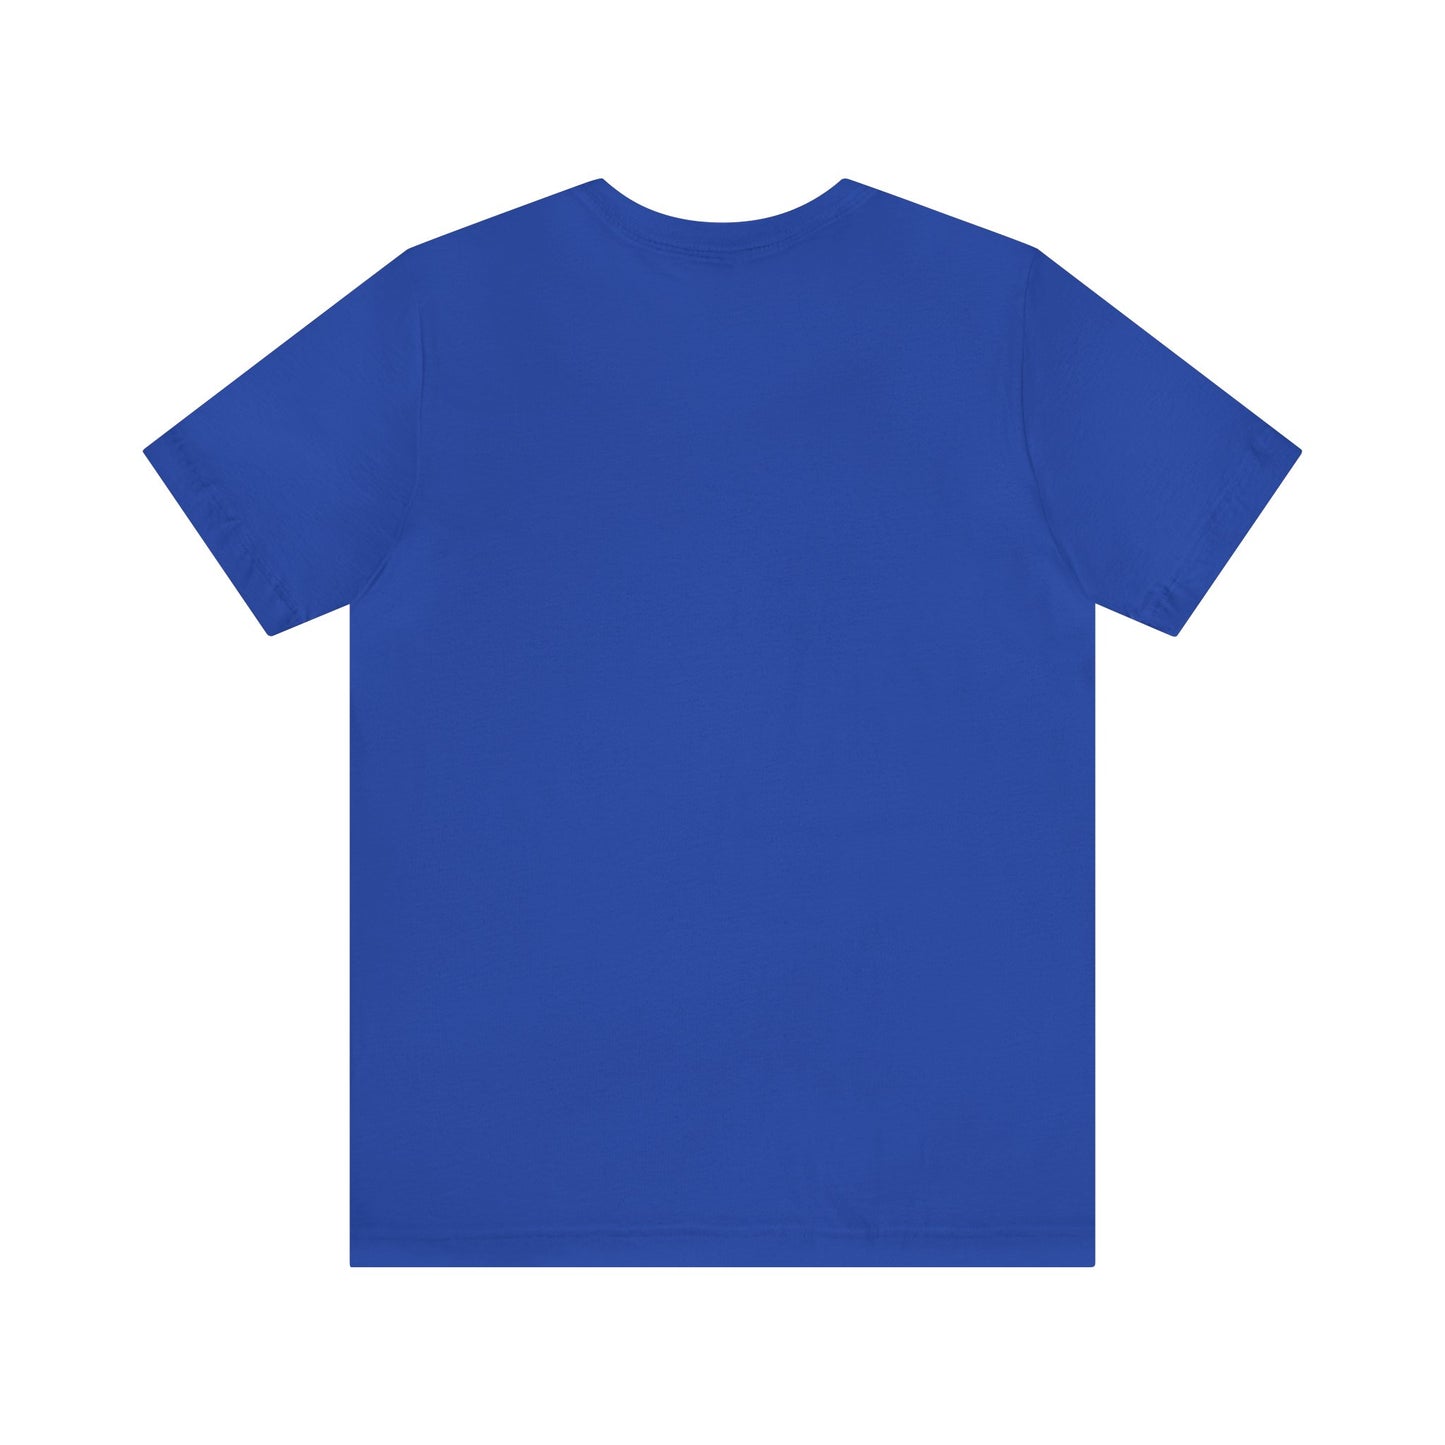 A plain royal blue Unisex Jersey Short Sleeve Monochrome Logo Tee with a crew neckline, featuring a subtle "Toronto" inscription, displayed flat against a white background by Printify.